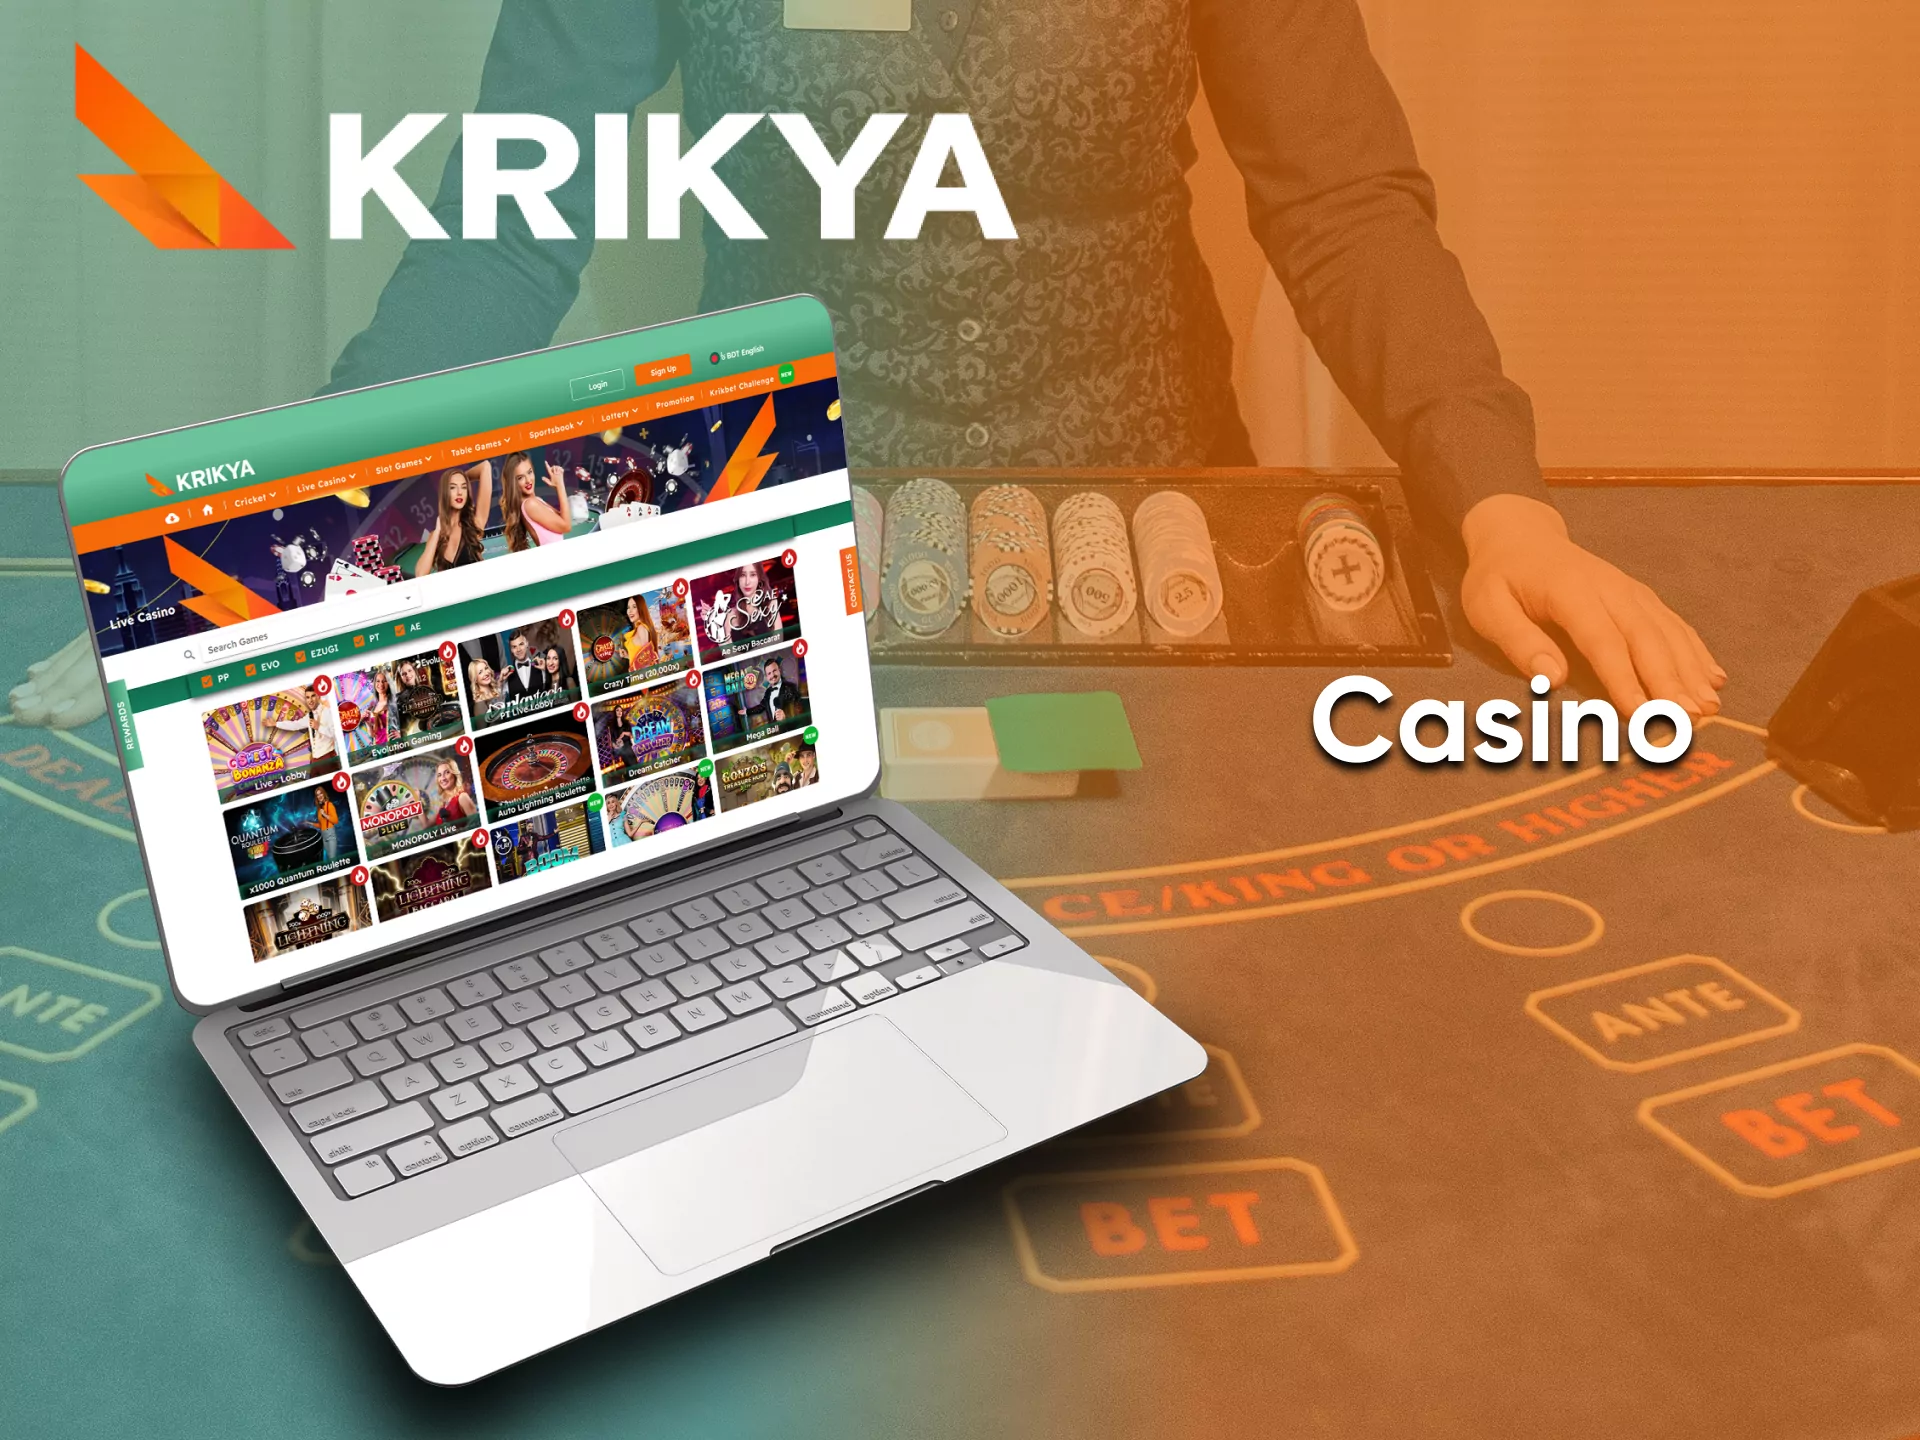 Game lovers can try their hand at Krikya Casino.